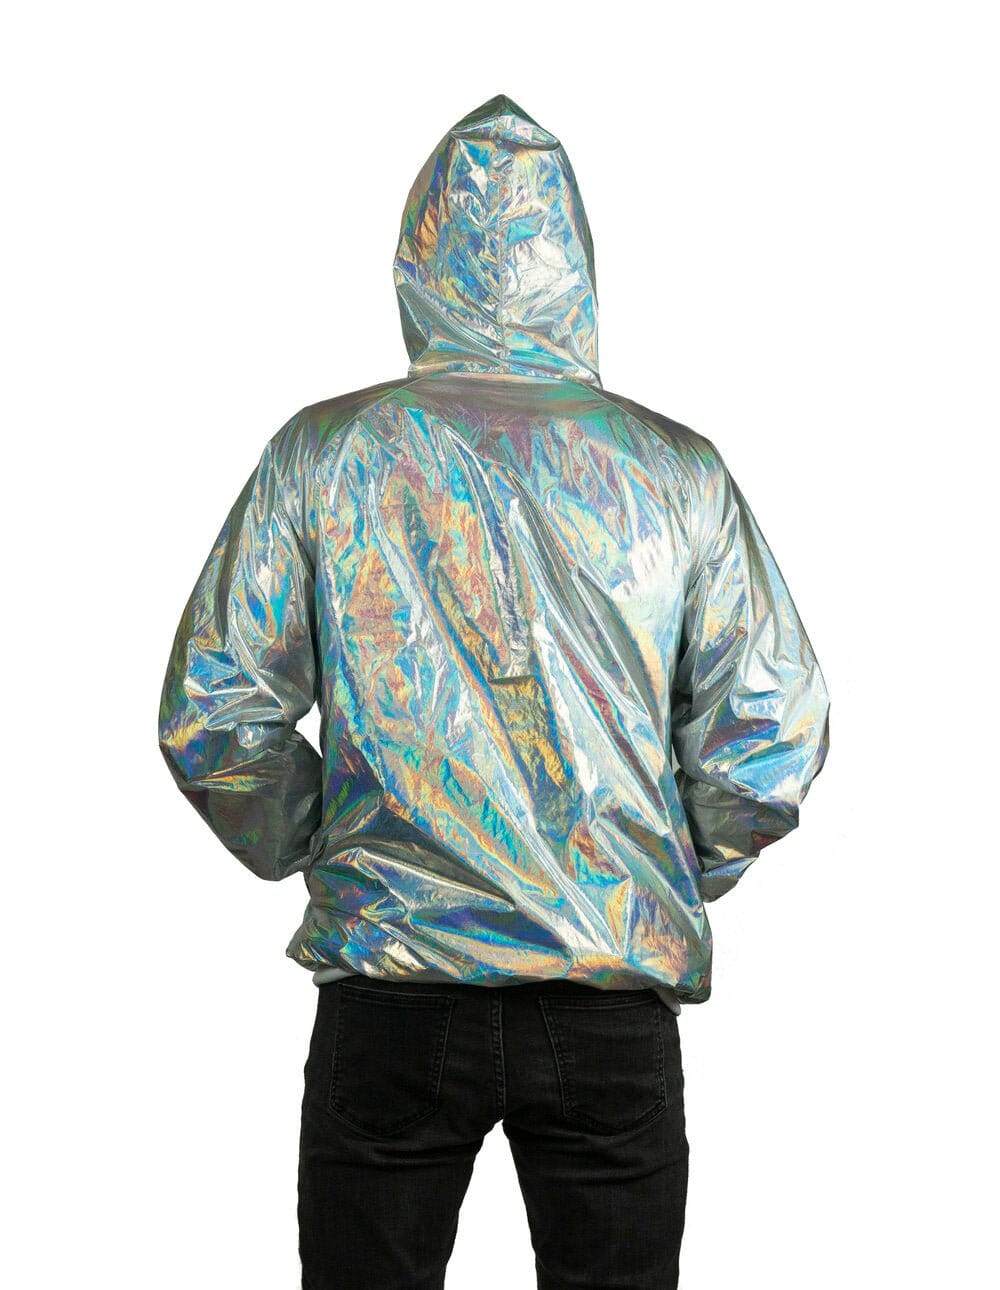 Back visual of silver holographic windbreaker with hood by Love Khaos Streetwear Fashion